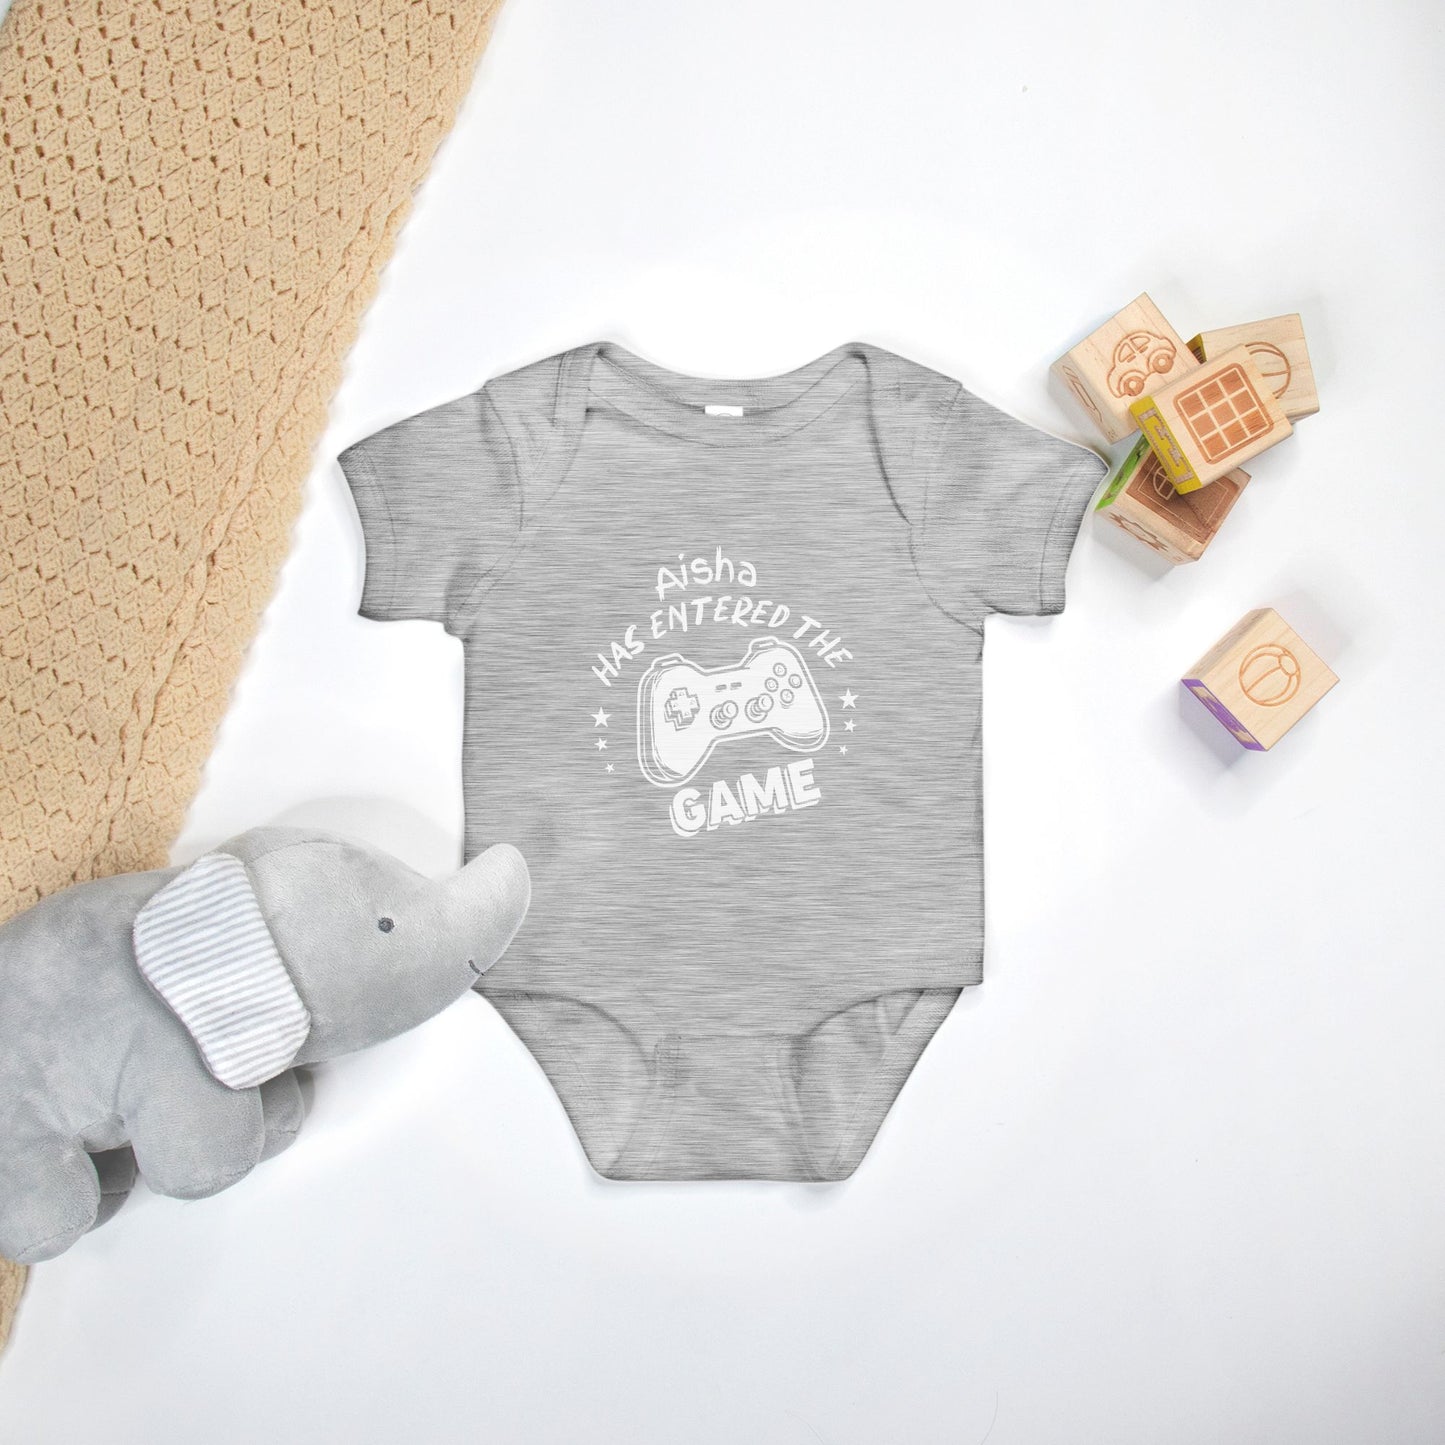 Has Entered The Game in White Design Personalized Onesie